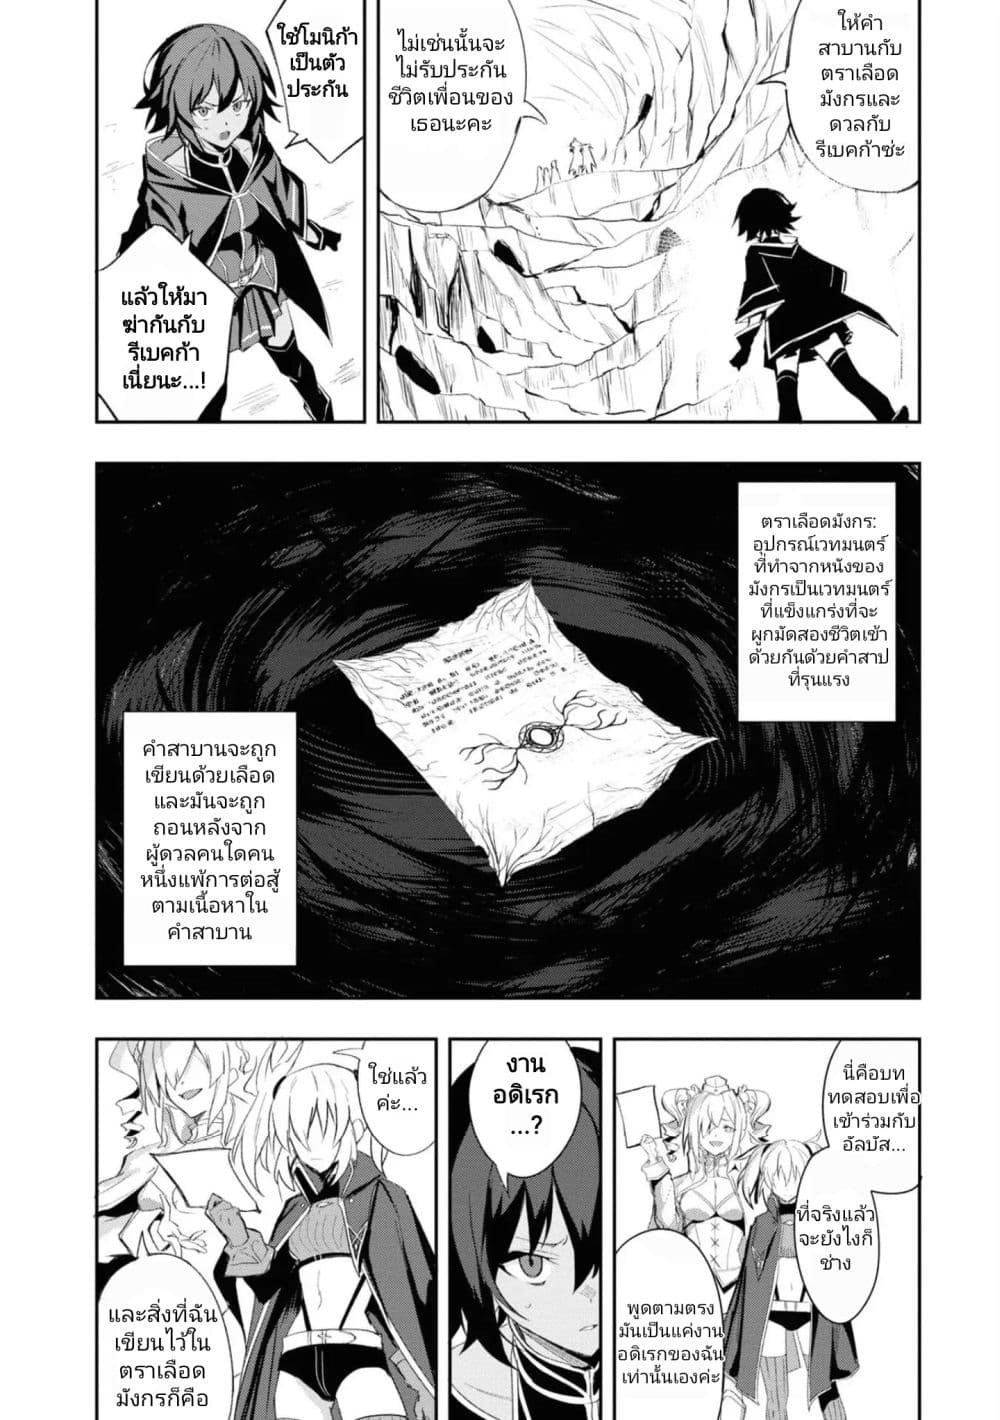 Witch Guild Fantasia 9 (2)